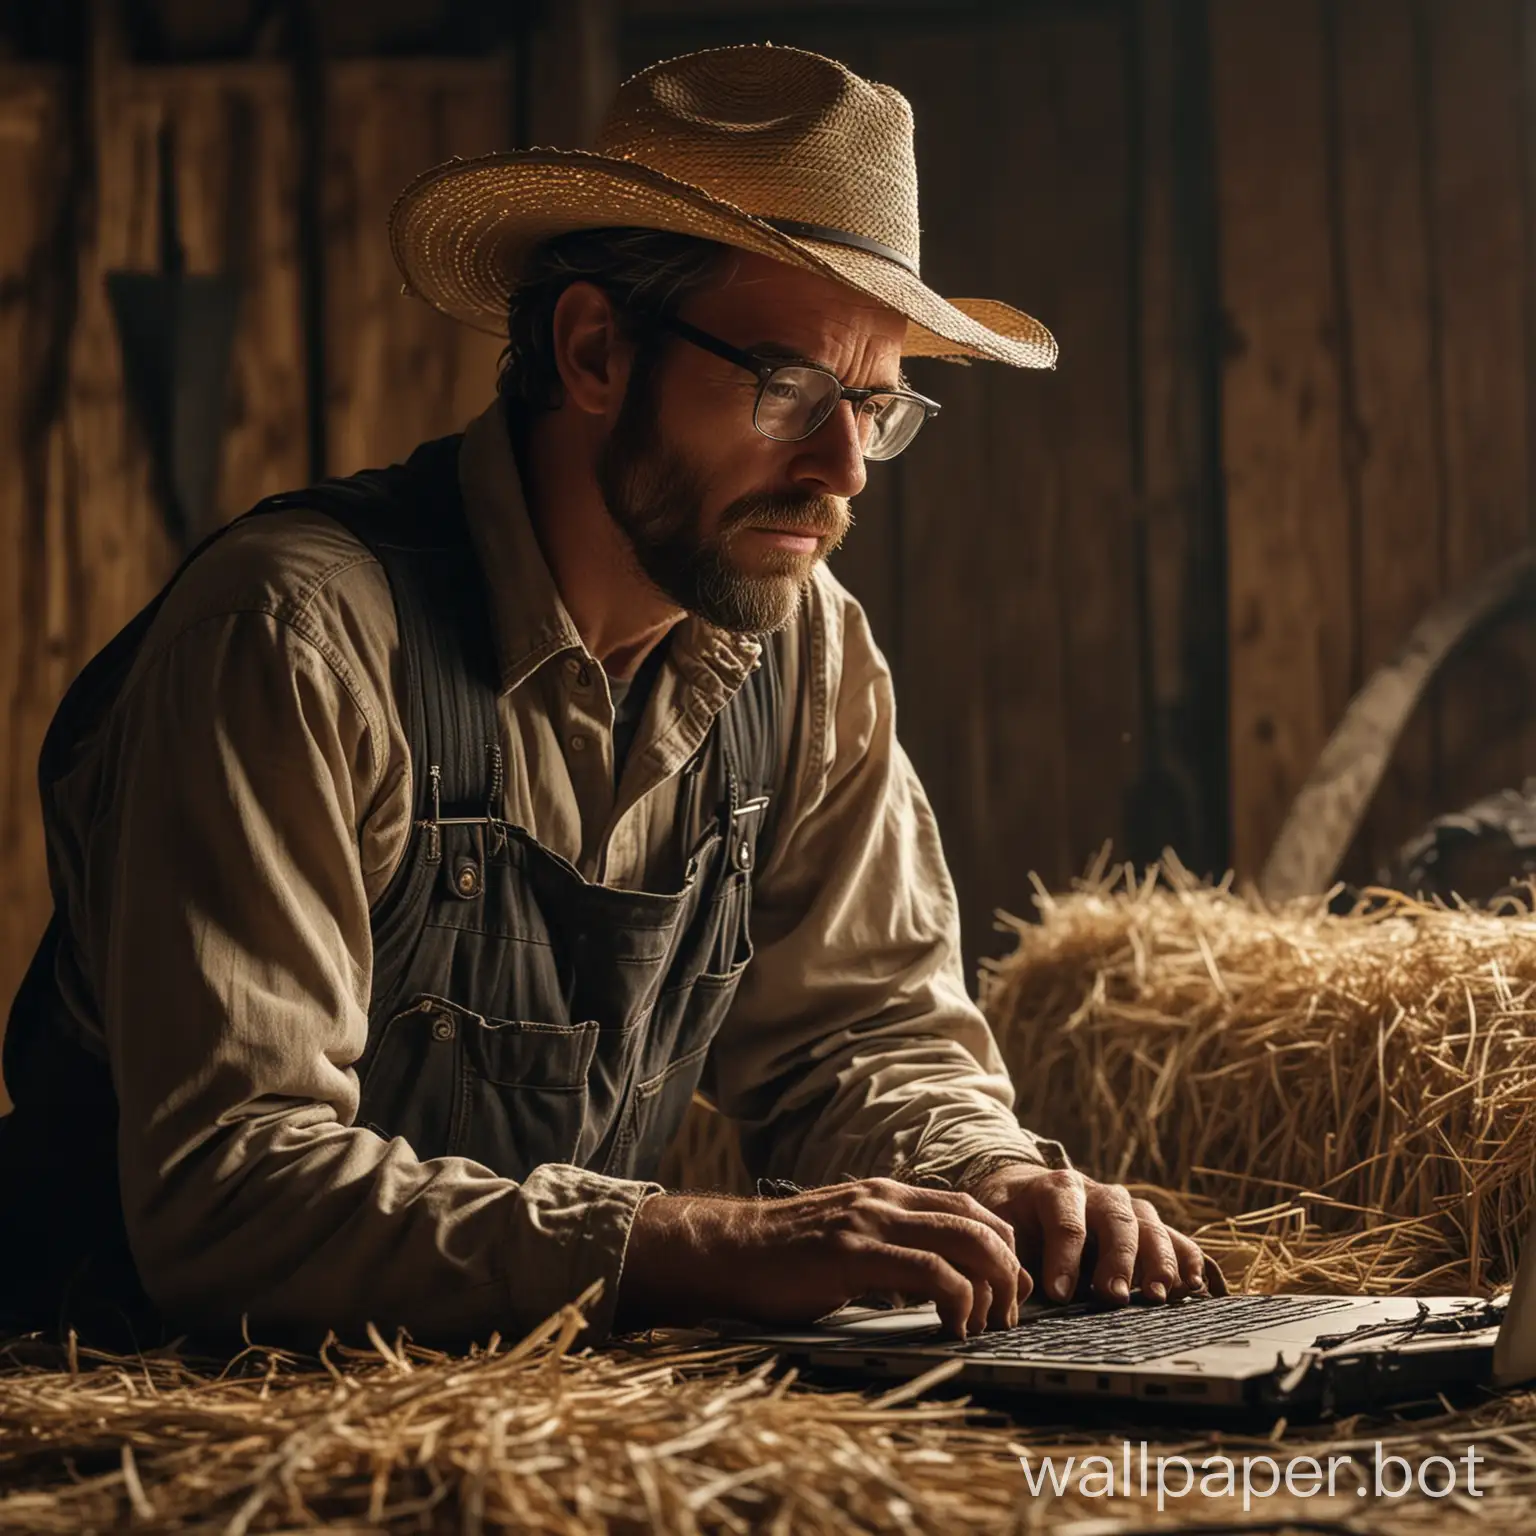 A rugged farmer stands in a rustic barn, surrounded by hay bales and farming tools. He wears a straw hat, overalls, and work boots, with dirt on his hands and face. In contrast, his expression is one of intense focus as he works on a sleek laptop resting on a wooden table. Cables and digital equipment mix with traditional farming tools, and glowing lines of code reflect off his glasses. The barn is dimly lit, with a soft glow from the computer screen illuminating his face, creating a juxtaposition of rural and high-tech elements